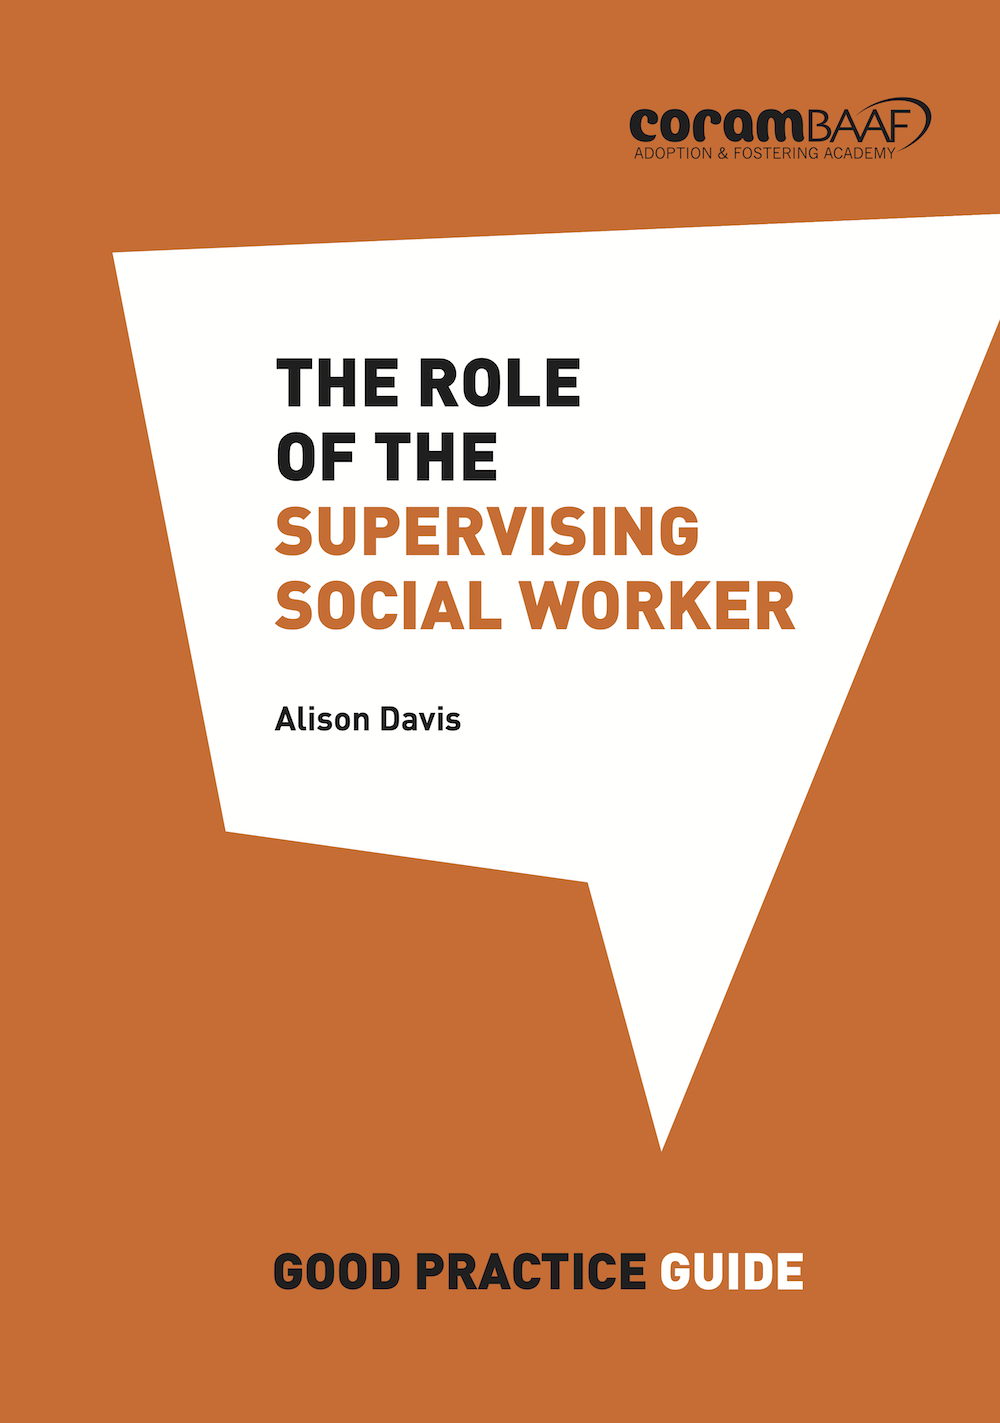 The Role of the Supervising Social Worker